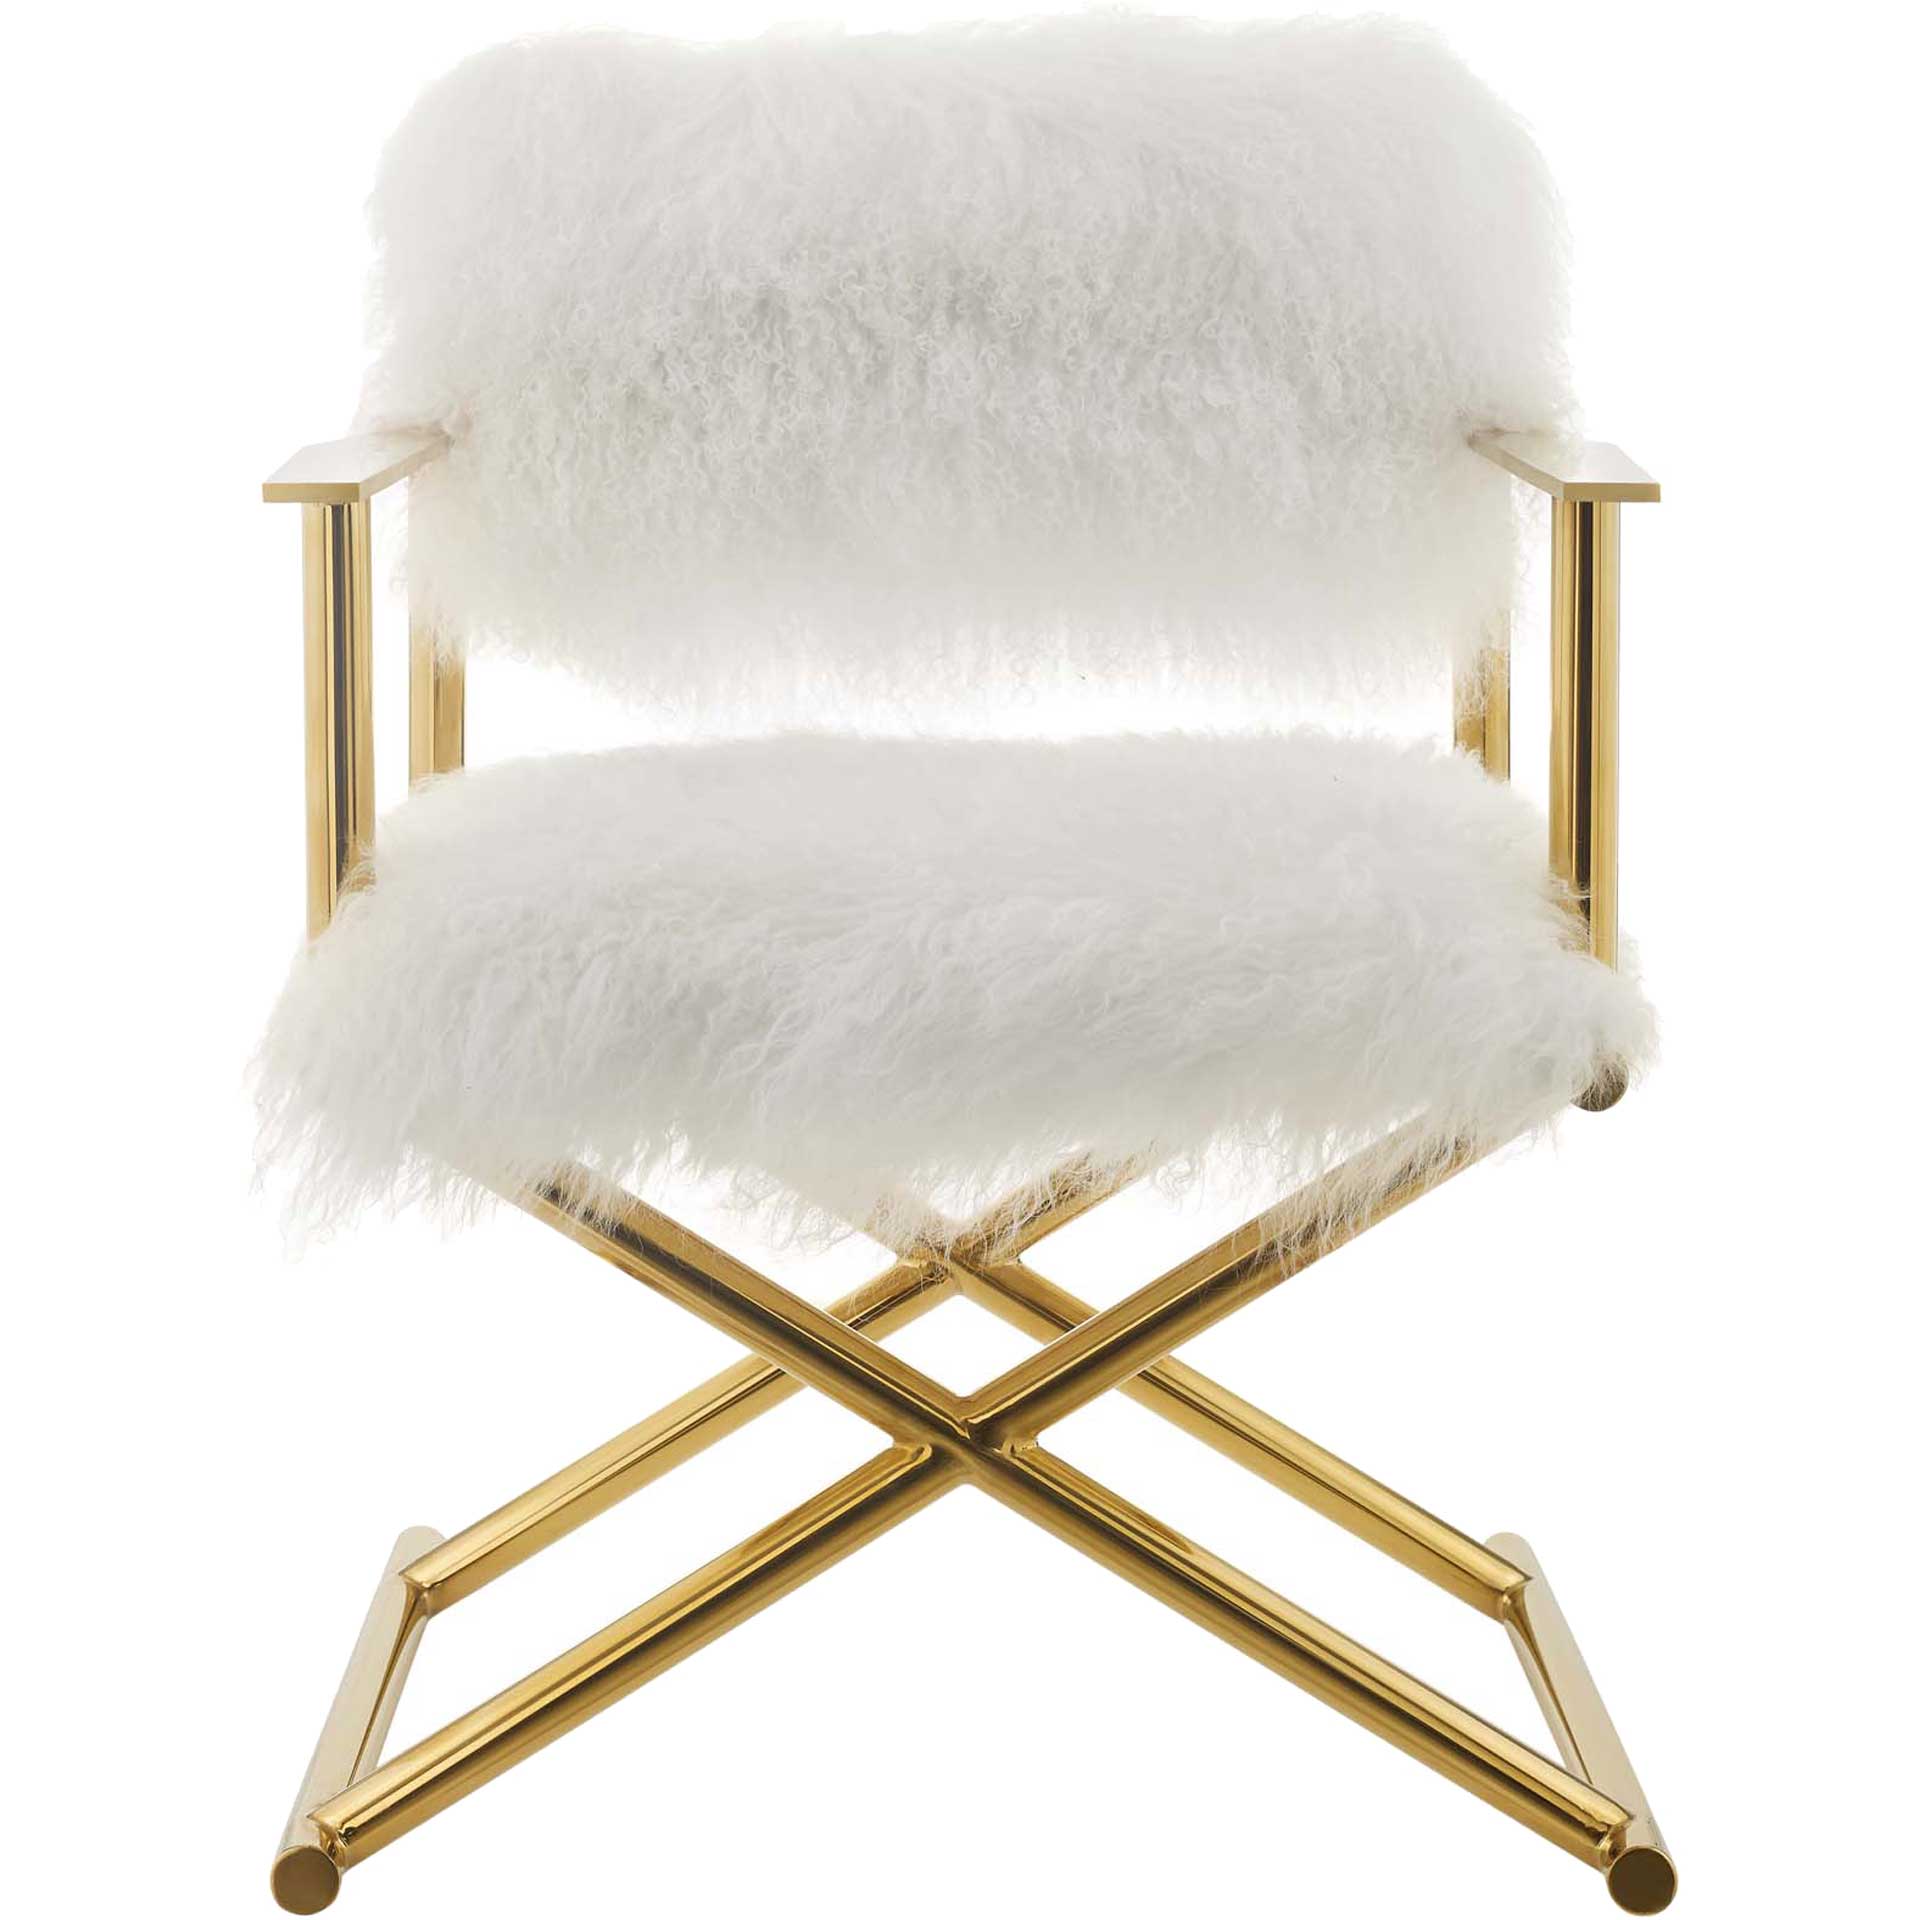 Ace Director's Chair Gold/White